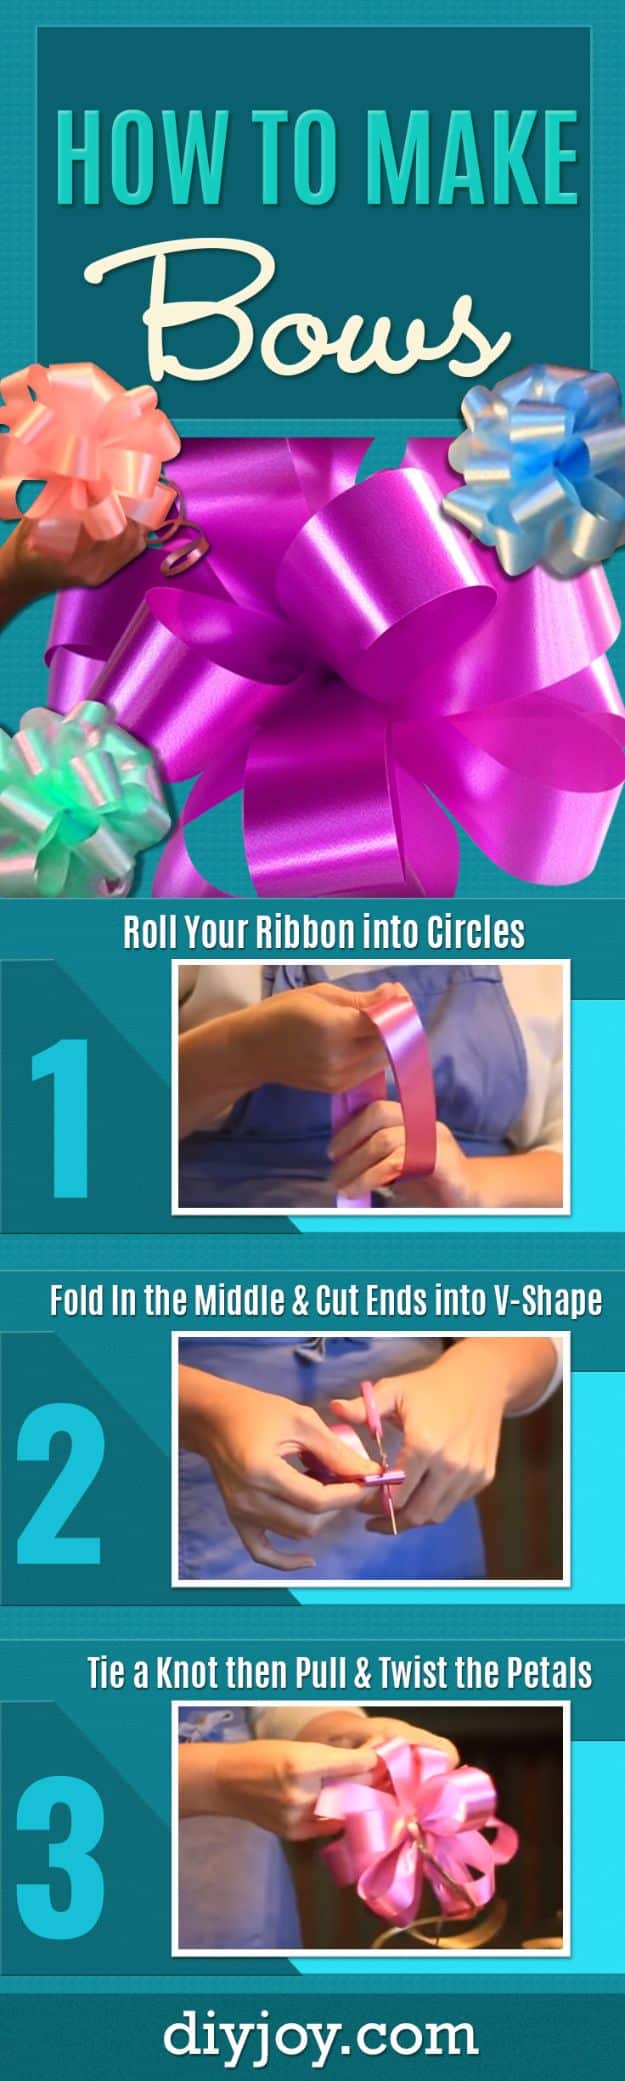 Creative Bows For Packages - How to Make Beautiful Bows DIY - Make Handmade Bows for Christmas Presents and Holiday Gifts - Cute and Easy Ideas for Making Your Own Bows and Ribbons - Step by Step Tutorials and Instructions for Tying A Bow - Cheap and Crafty Gift Wrapping Ideas on A Budget #diy #gifts #giftwrapping #christmasgifts